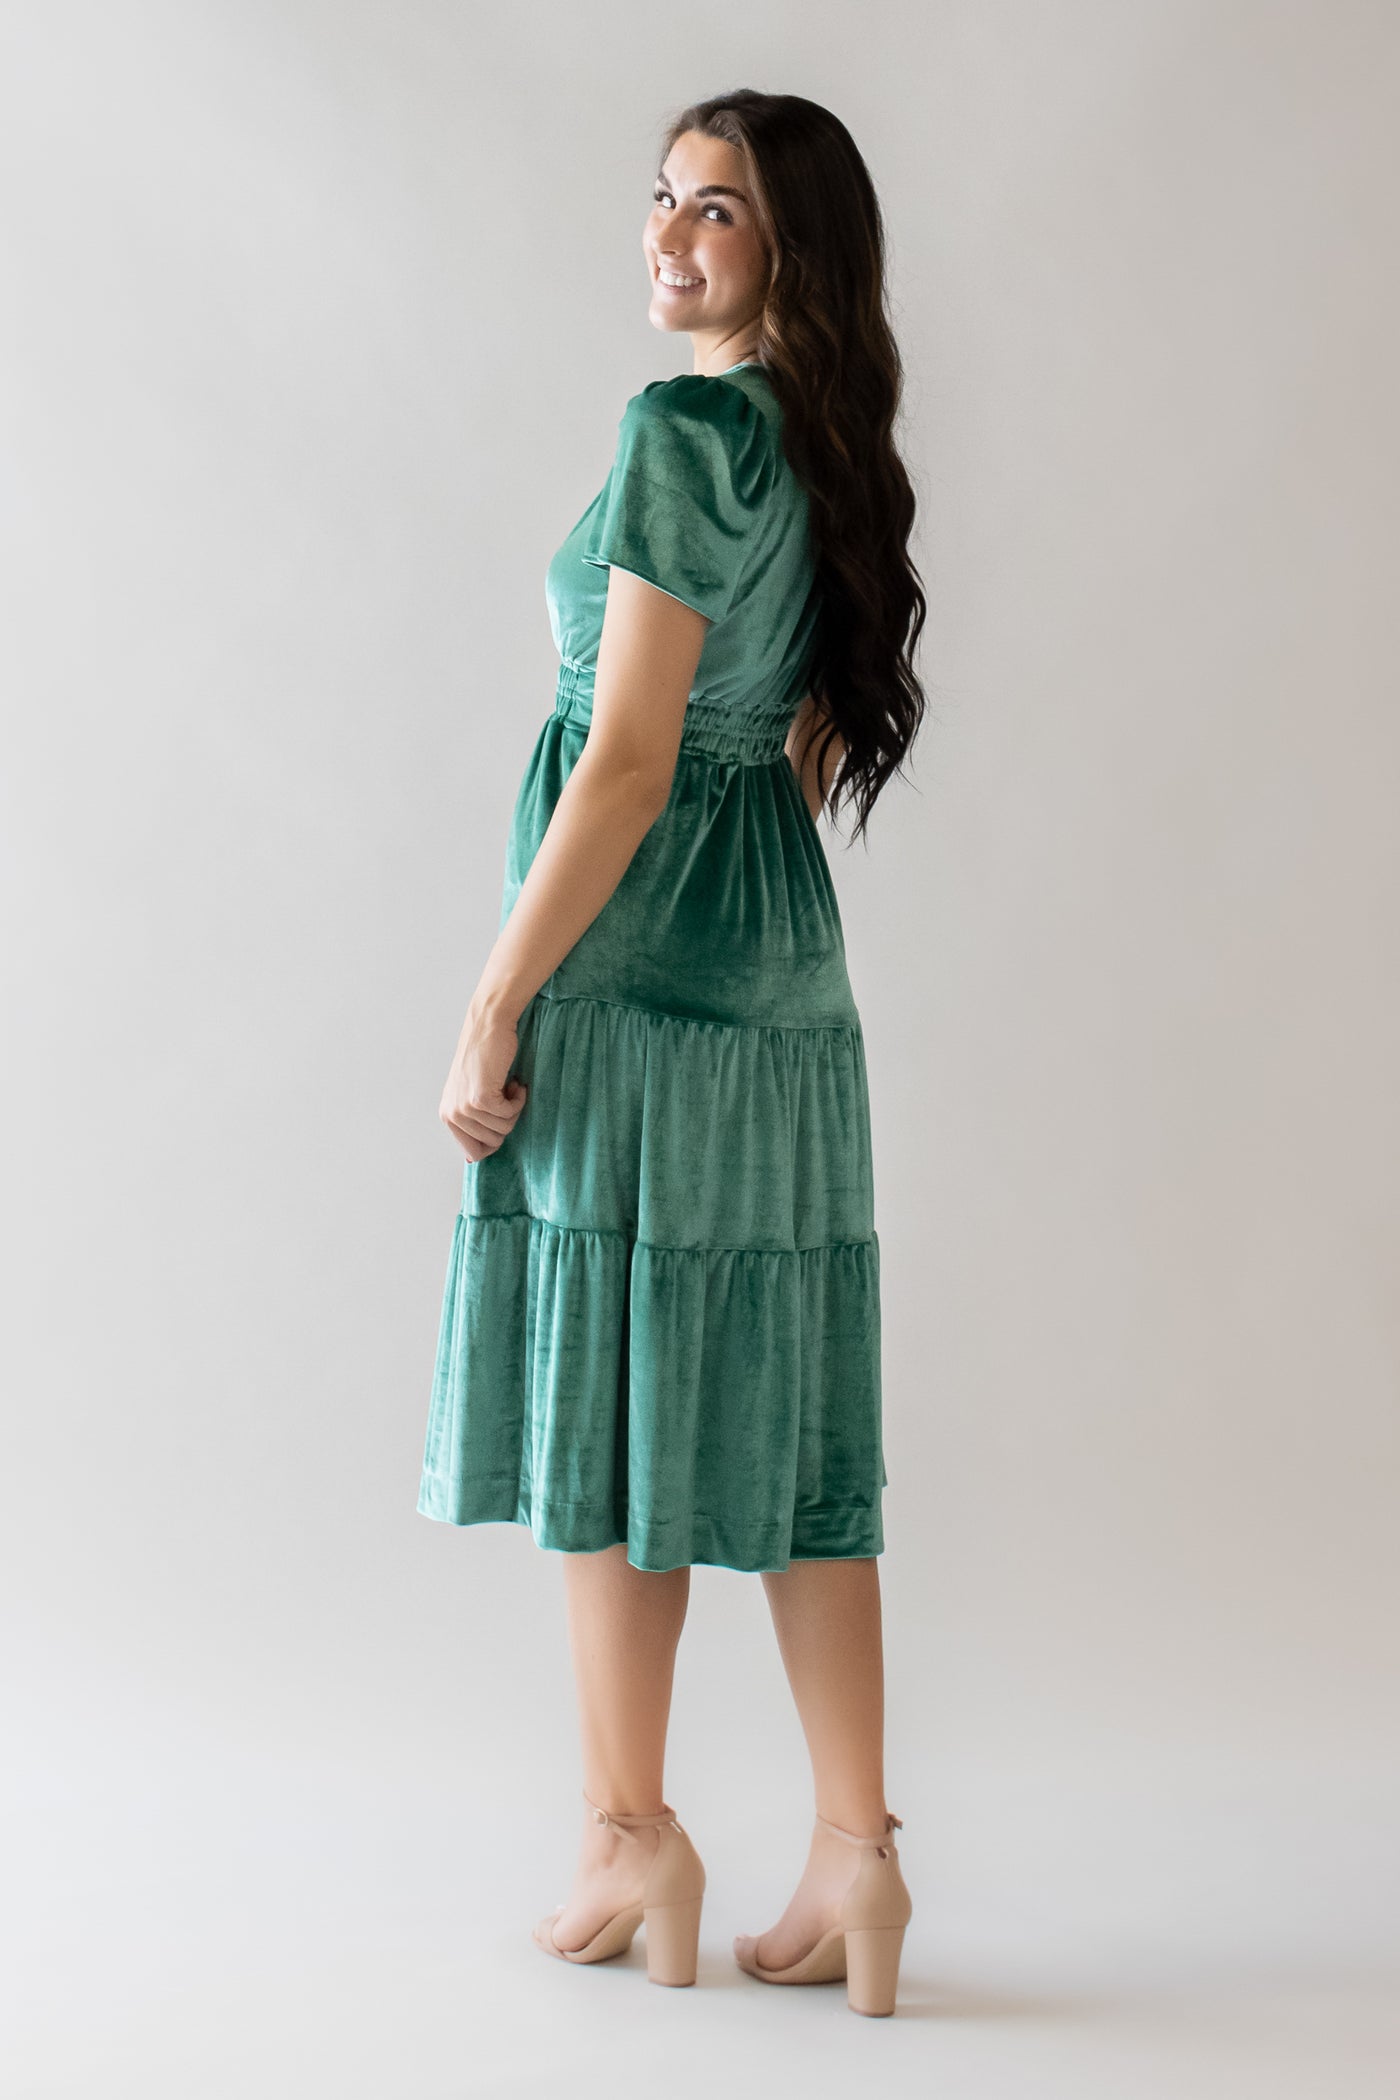 This is the back of a bright  green midi length skirt modest dress with velvet details.